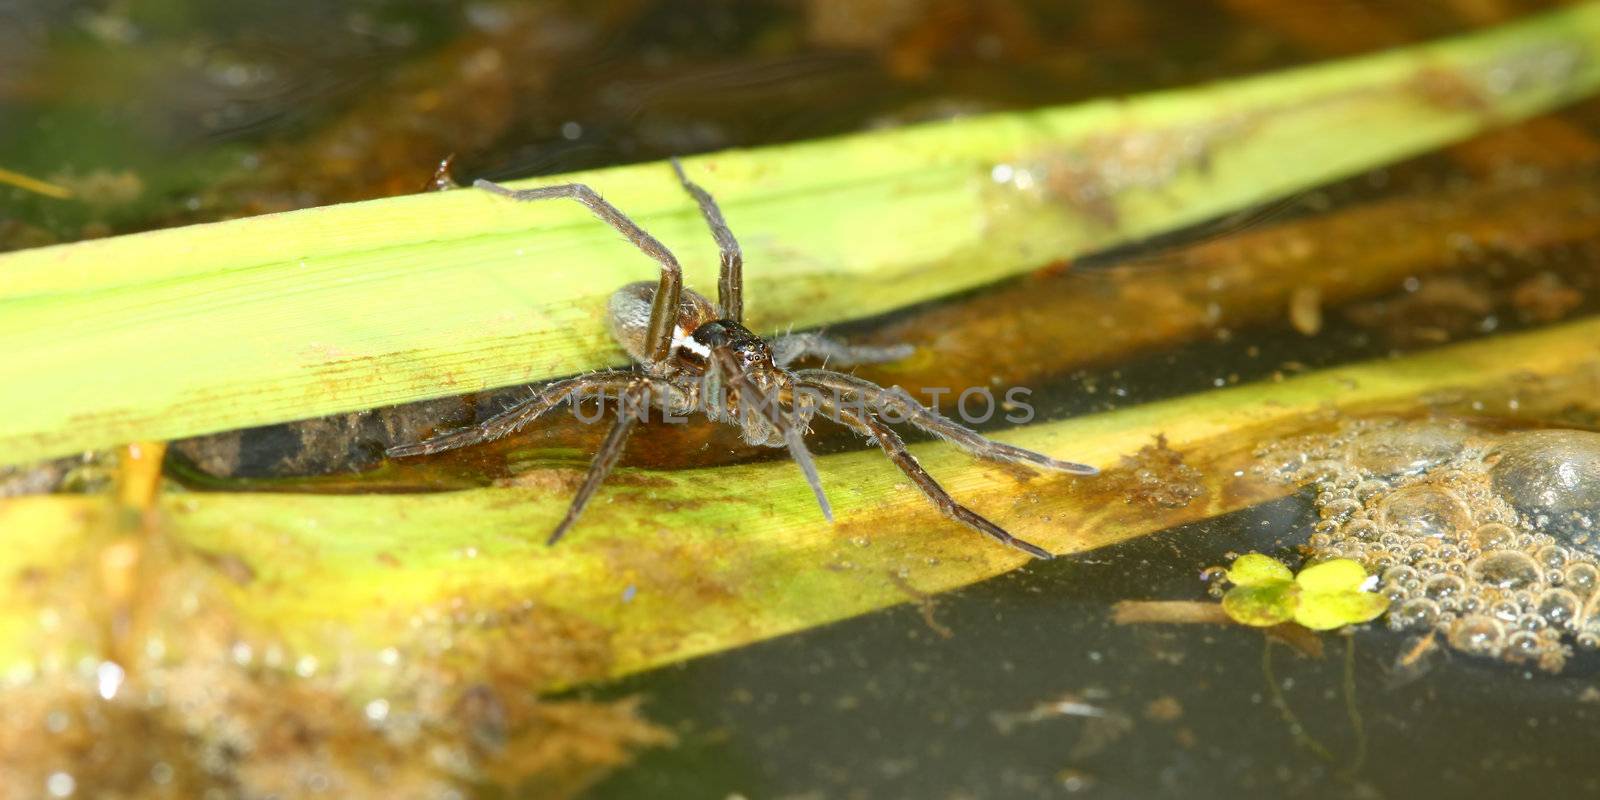 A Six-spotted Fishing Spider (Dolomedes triton) in an Illinois wetland.